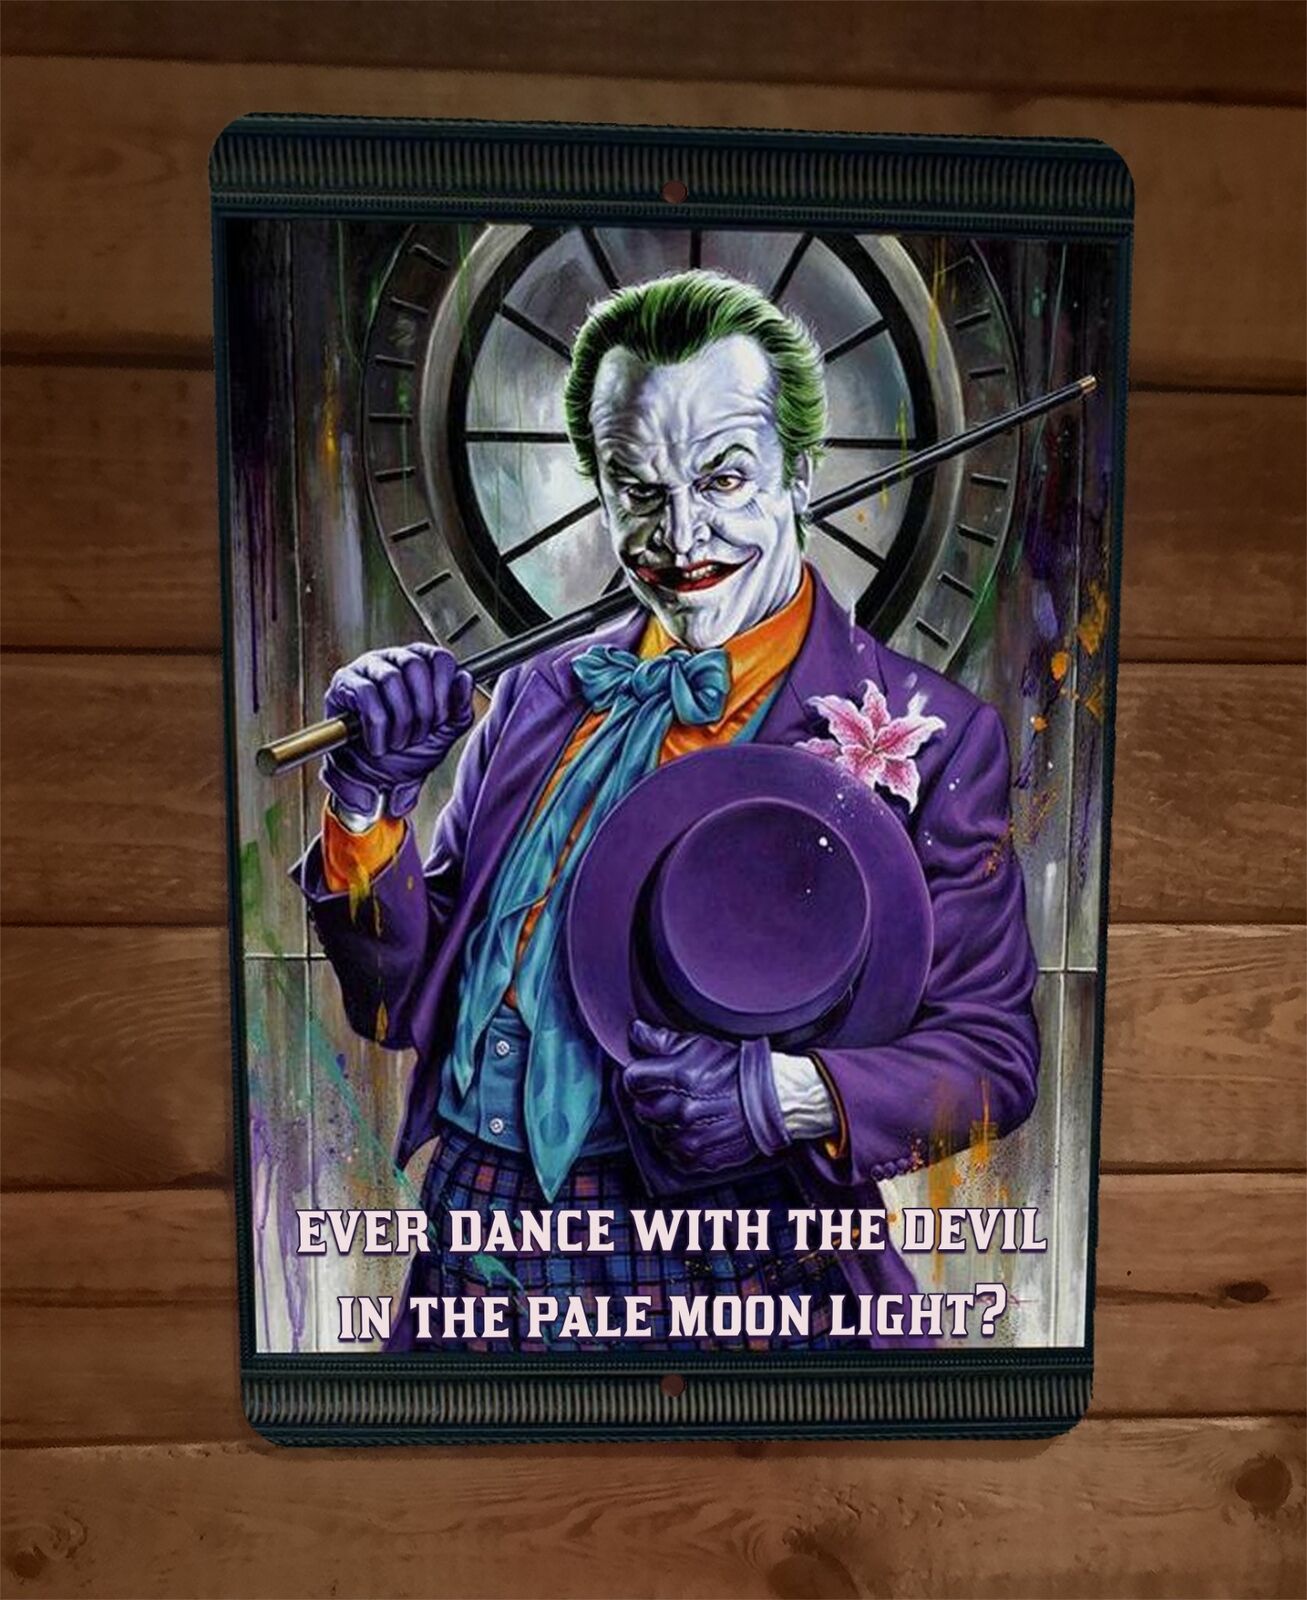 Ever Dance With The Devil in the Pale Moon Light 8x12 Metal Wall Sign Joker Jack